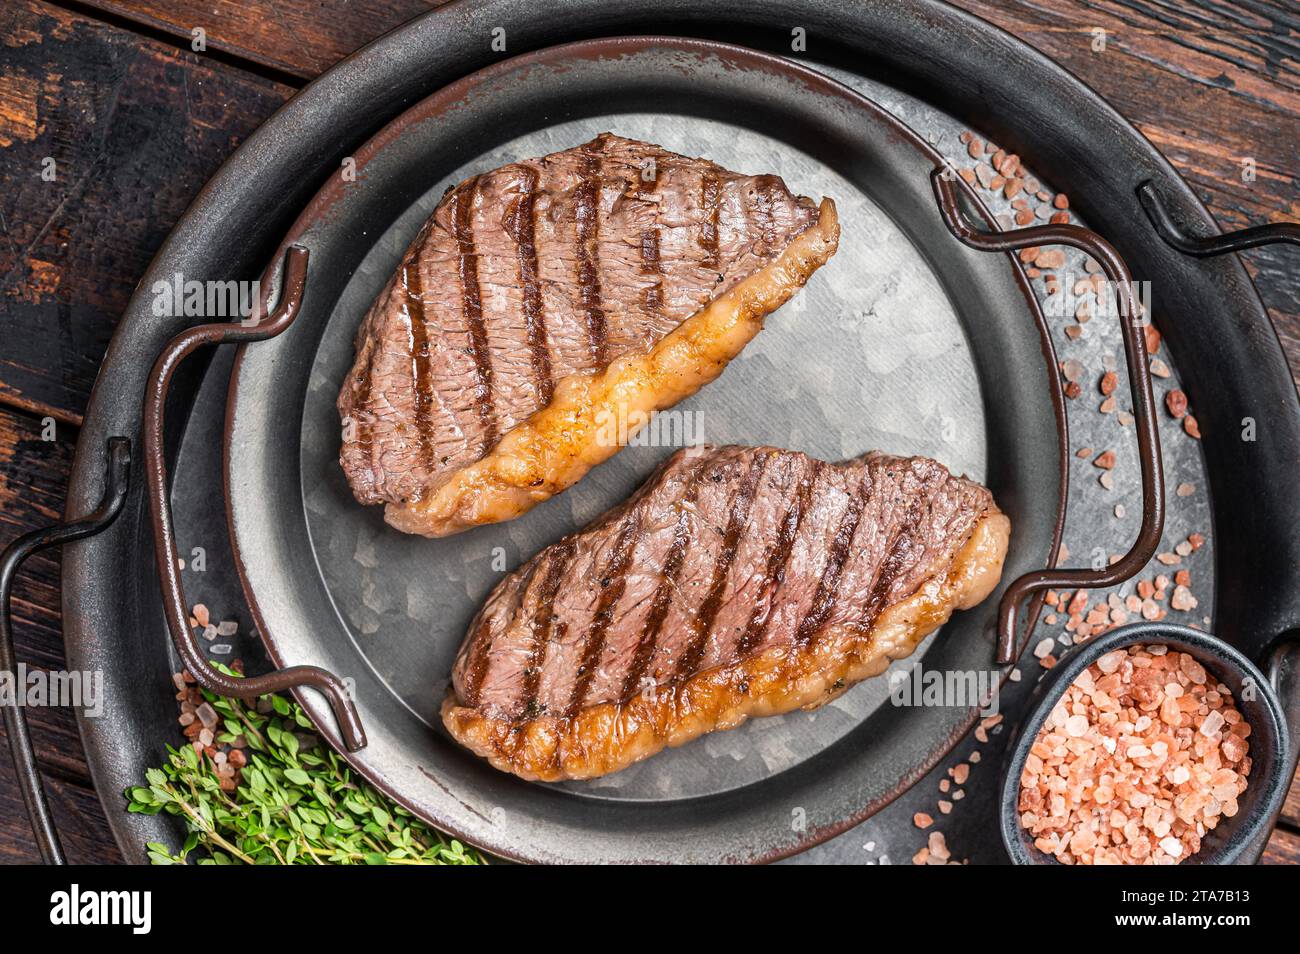 BBQ Grilled top sirloin steak, cup rump beef meat steak in a steel tray. Wooden background. Top view. Stock Photo